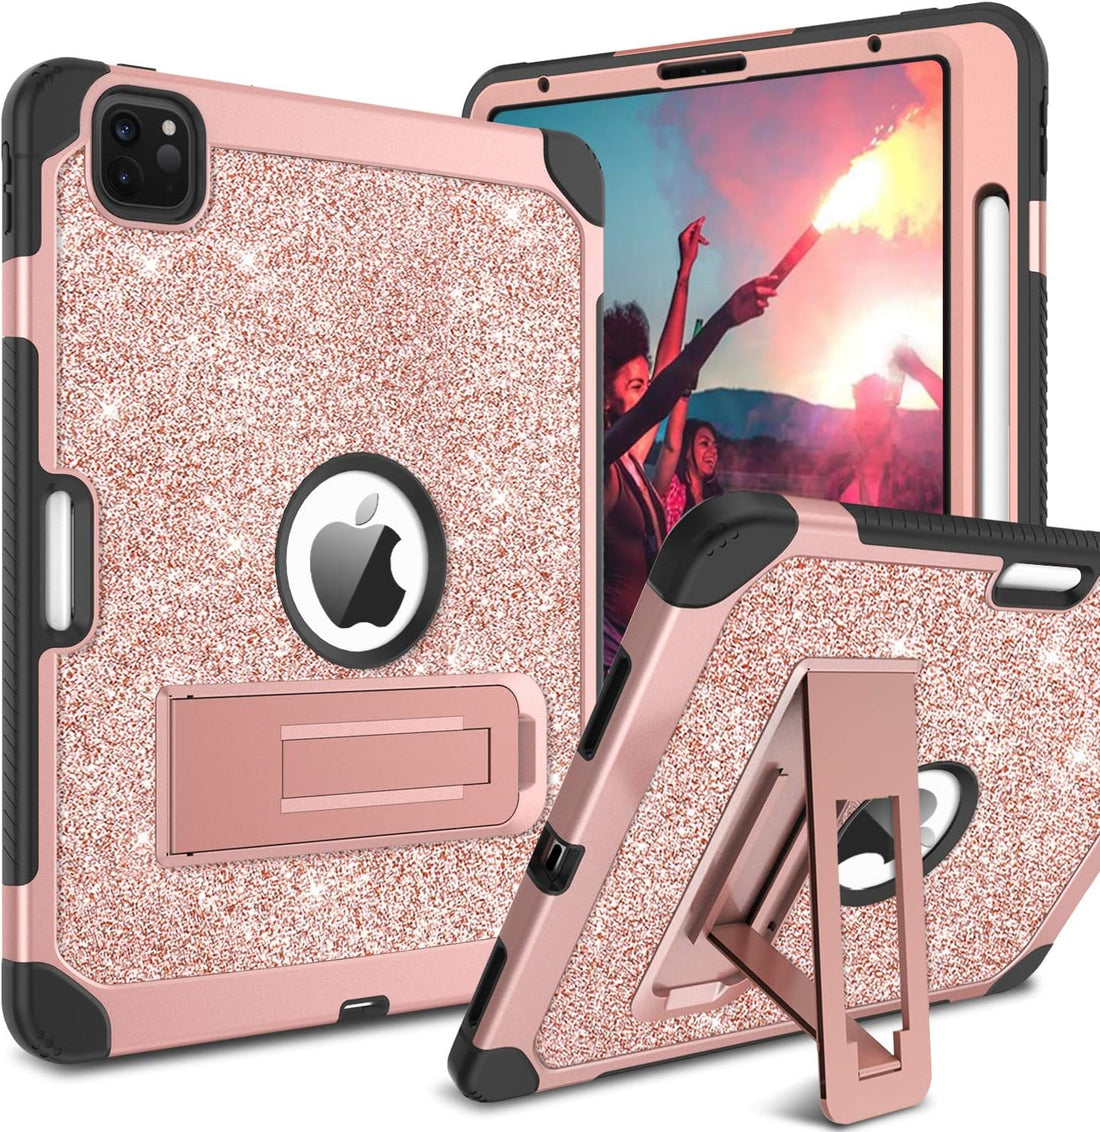 BENTOBEN iPad Air 5th/4th Generation Case, iPad Pro 11 Case, Glitter Sparkly 3 Layer Heavy Duty Shockproof Kickstand Faux Leather with Pencil Holder Protective Tablet Case Cover, Rose Gold